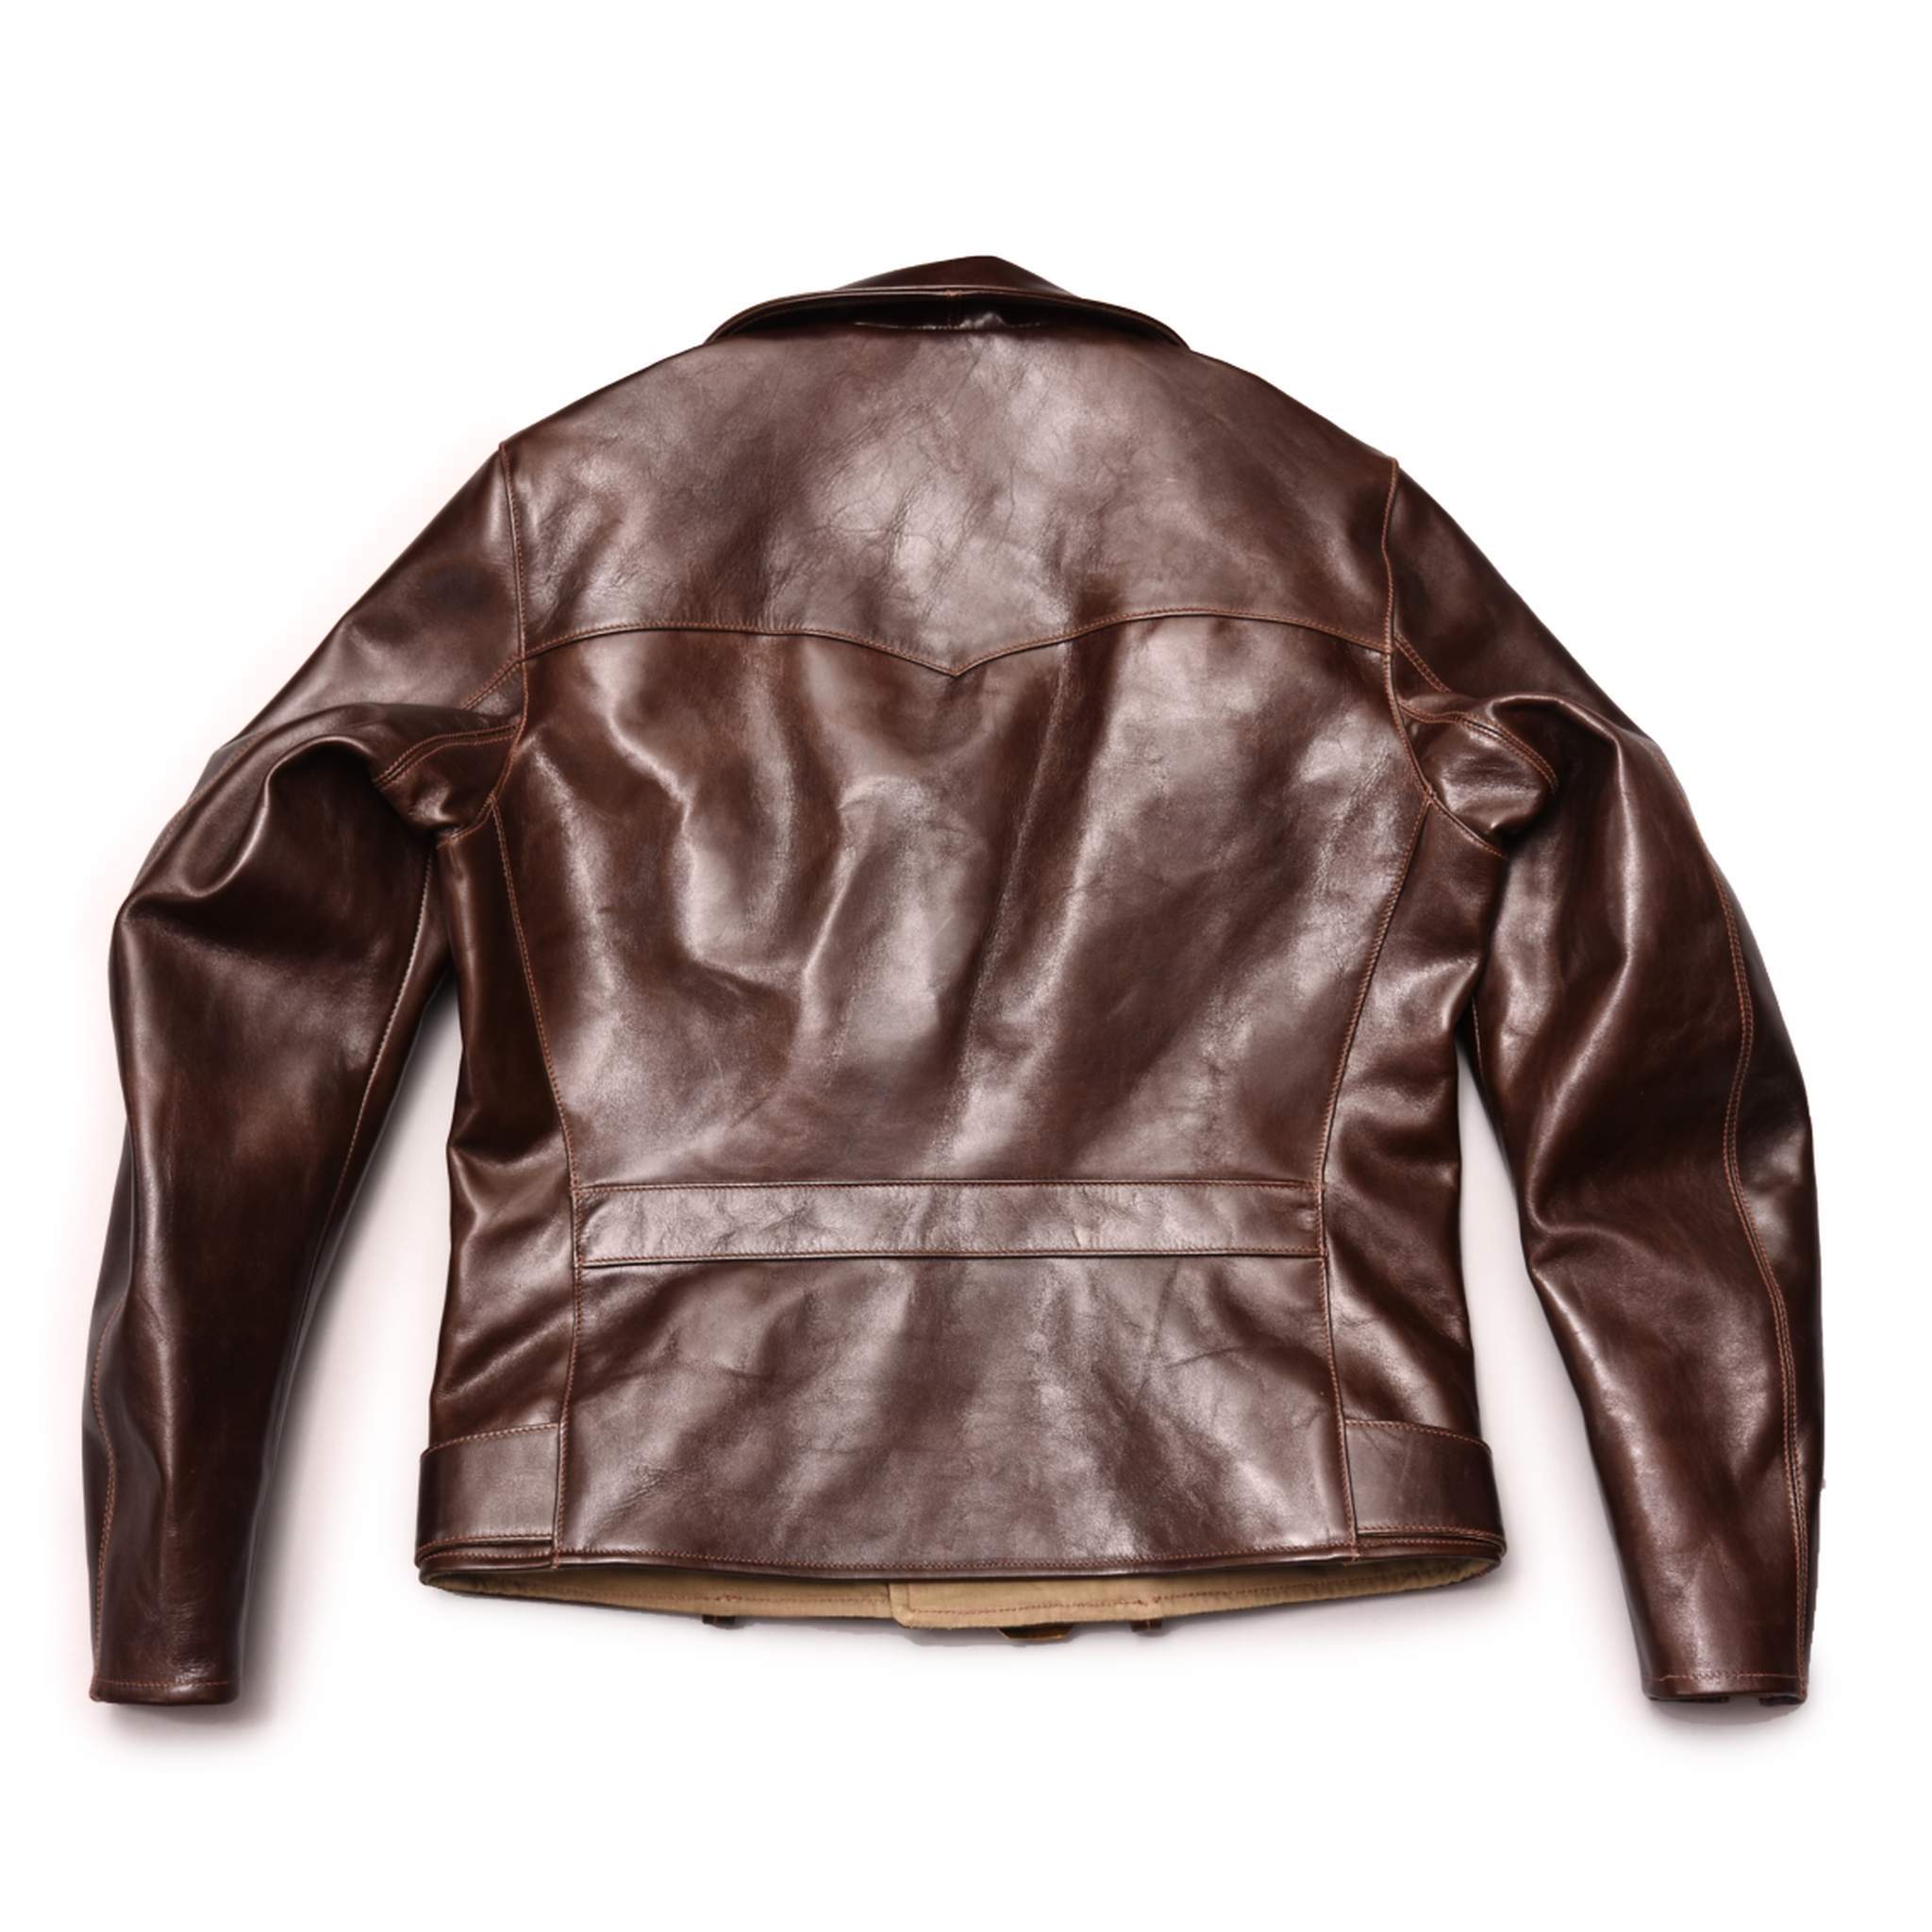 The Avro Horsehide Leather Jacket from Himel Bros. - Himel Bros. Leather